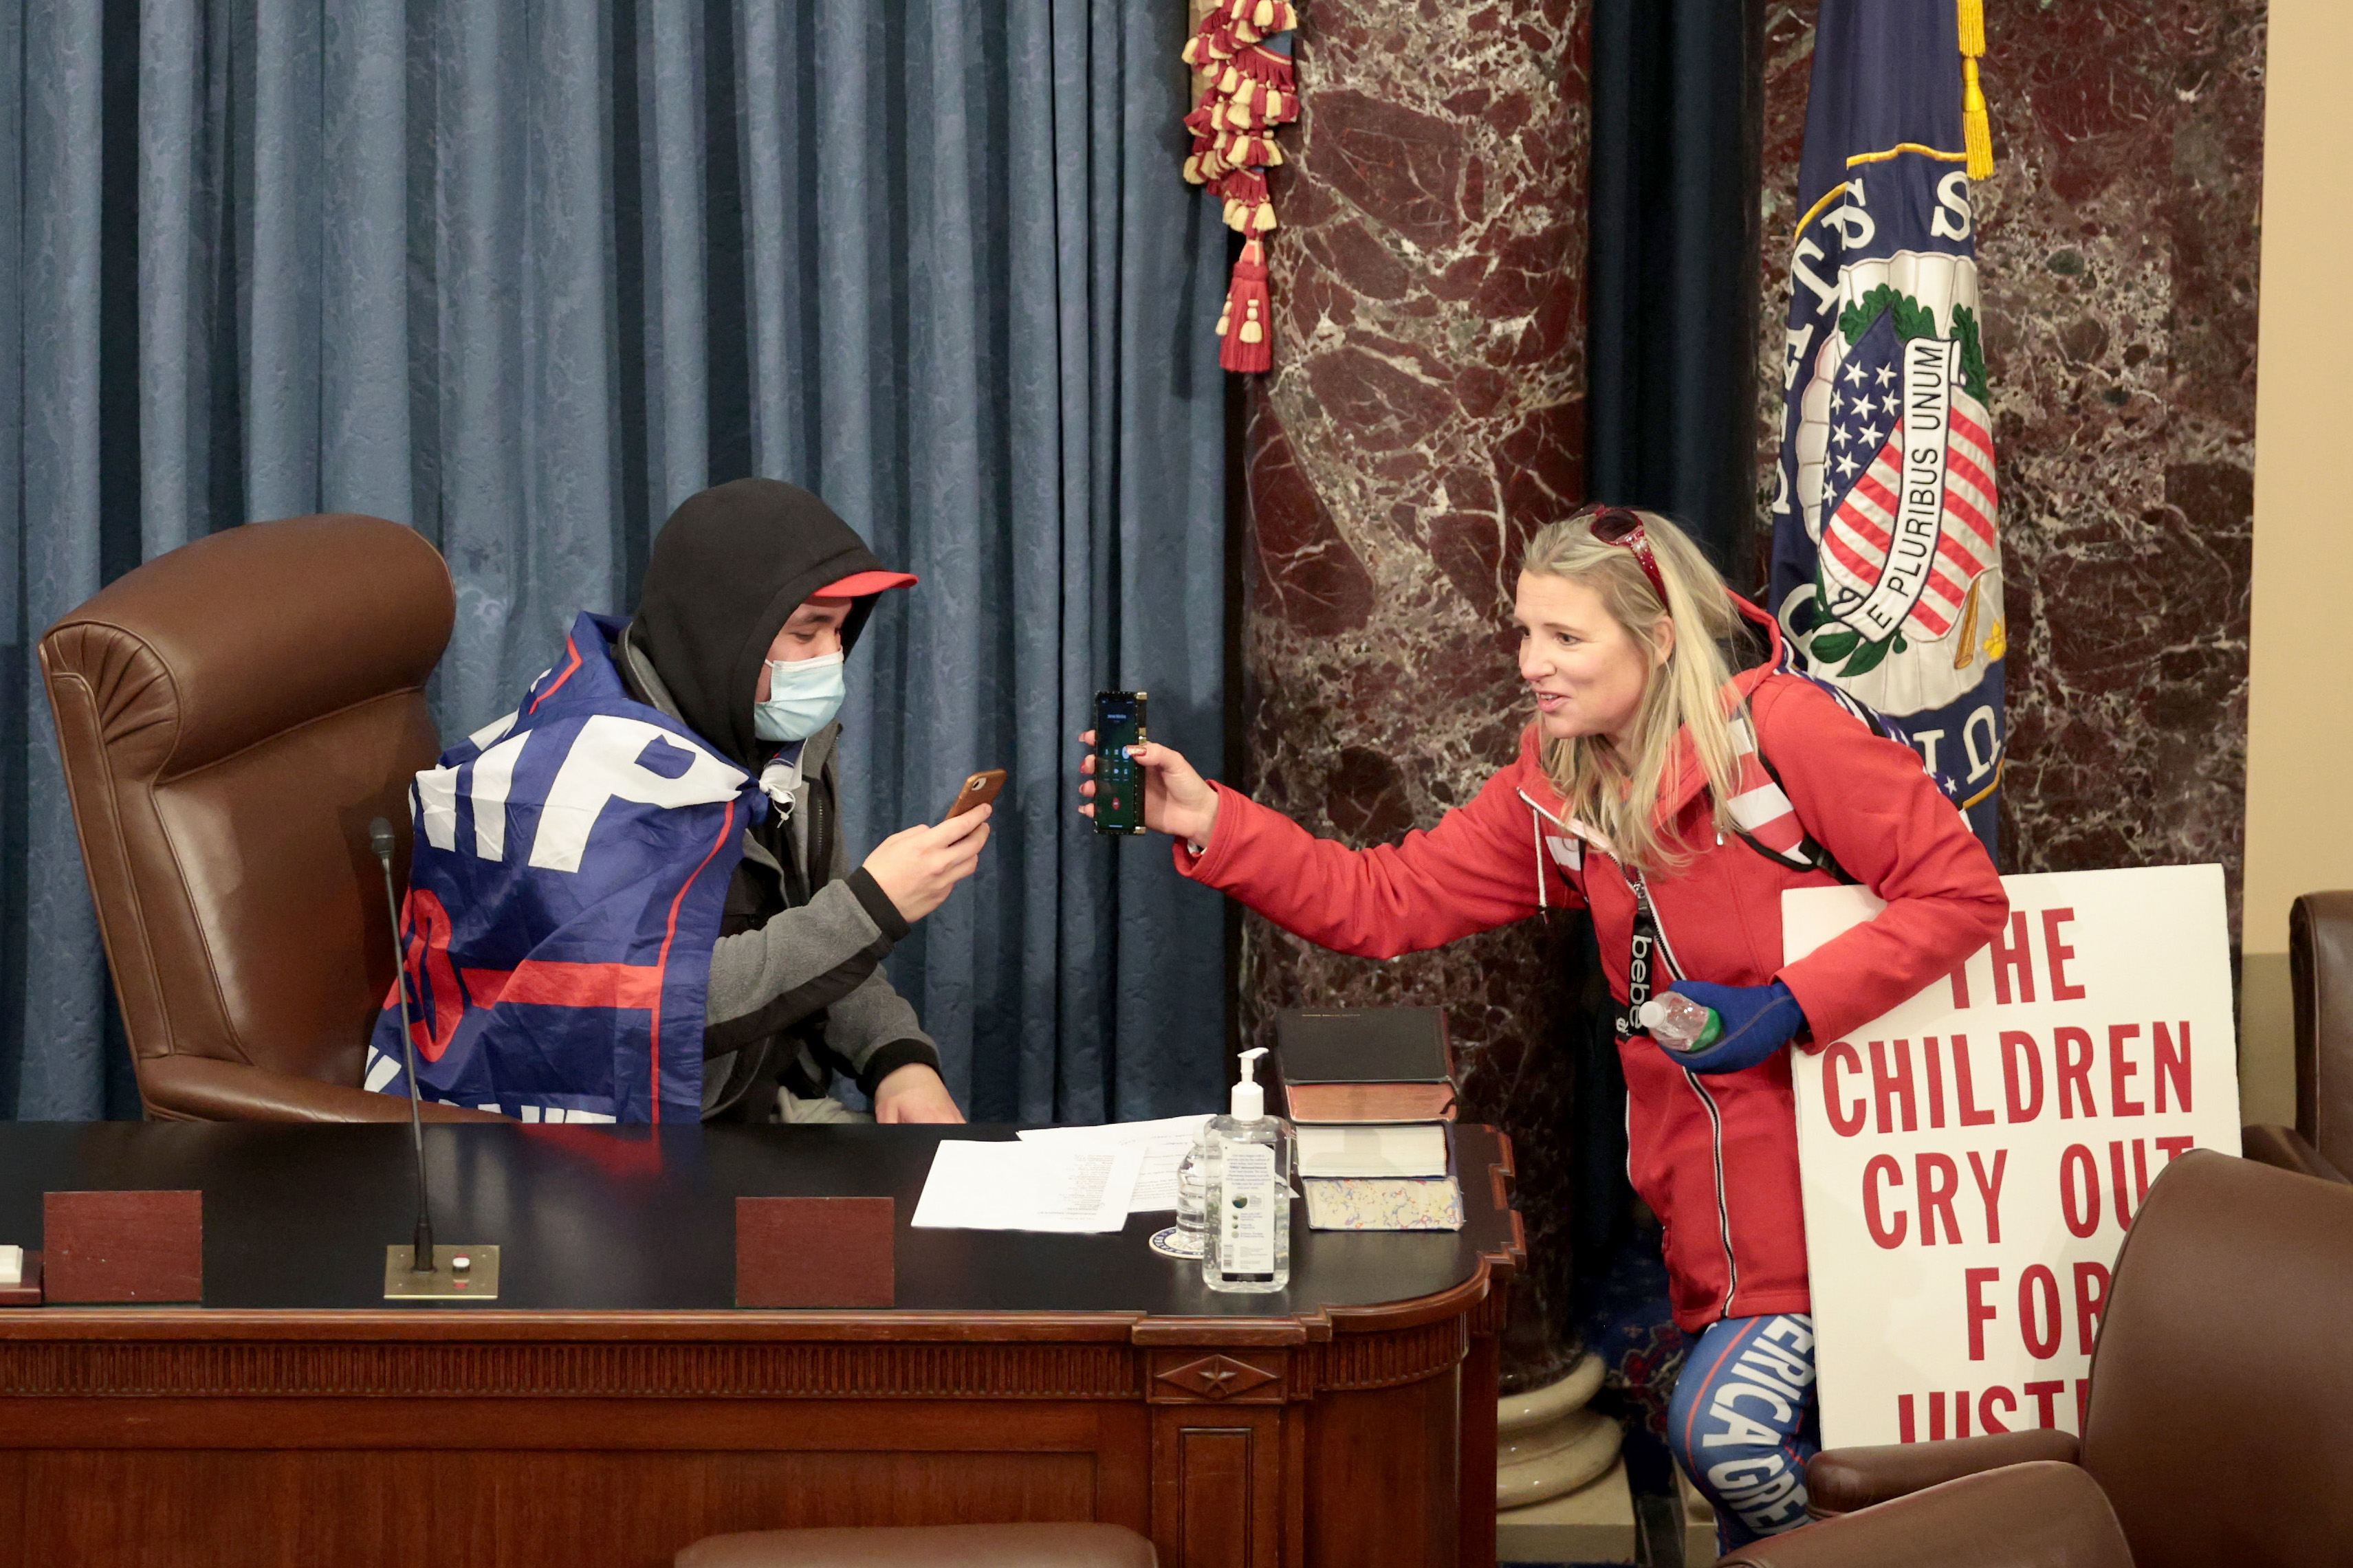 Christine Priola, Capitol Rioter seen at Mike Pence’s desk, stops schooling in QAnon Rant